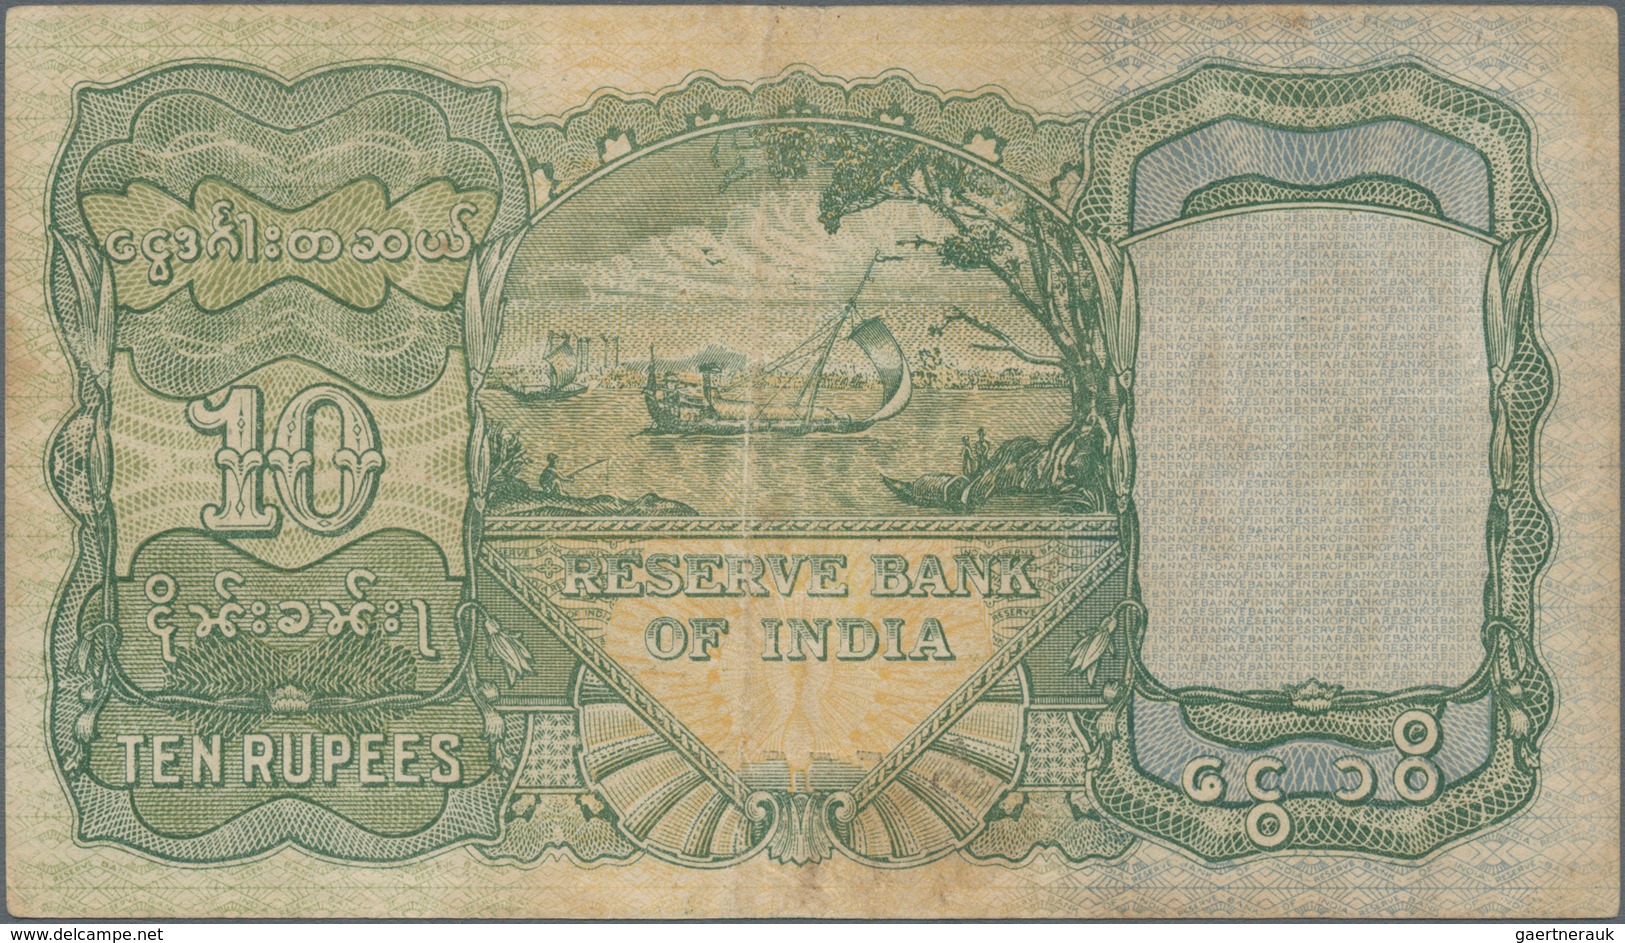 Burma / Myanmar / Birma: 10 Rupees ND Portrait KGIV P. 5 In Lightly Used Condition With Light Folds - Myanmar